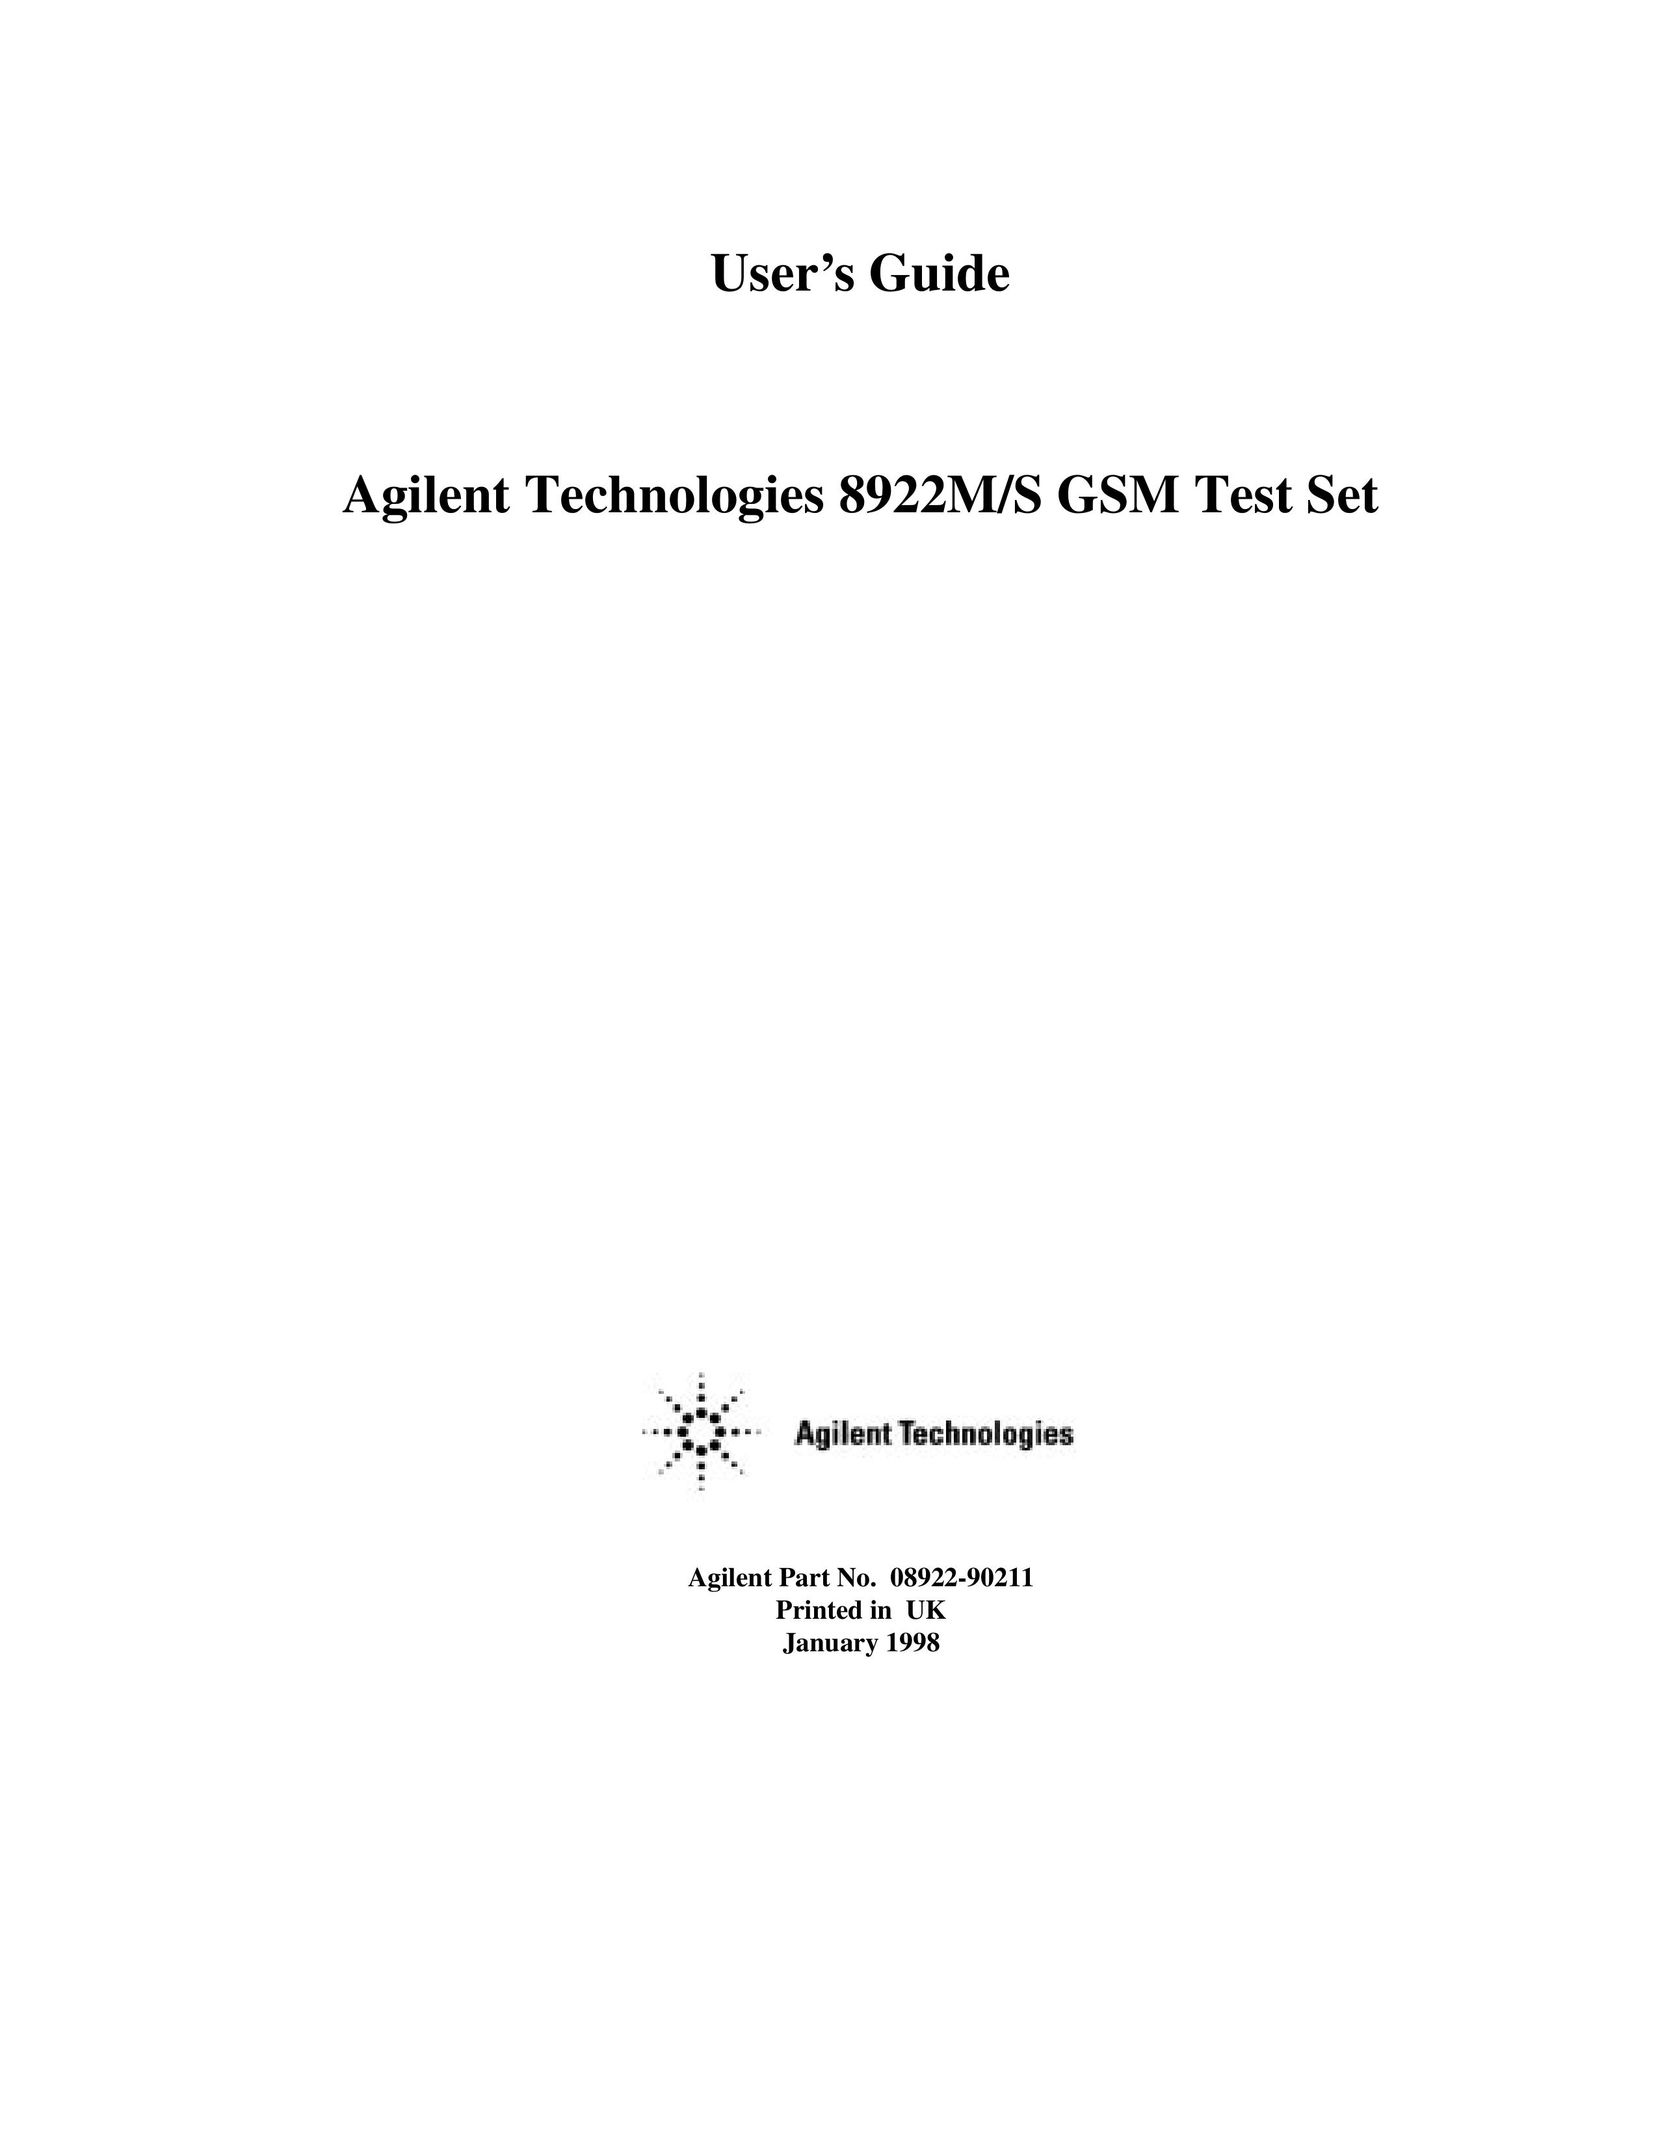 Agilent Technologies S GSM Cell Phone User Manual (Page 1)